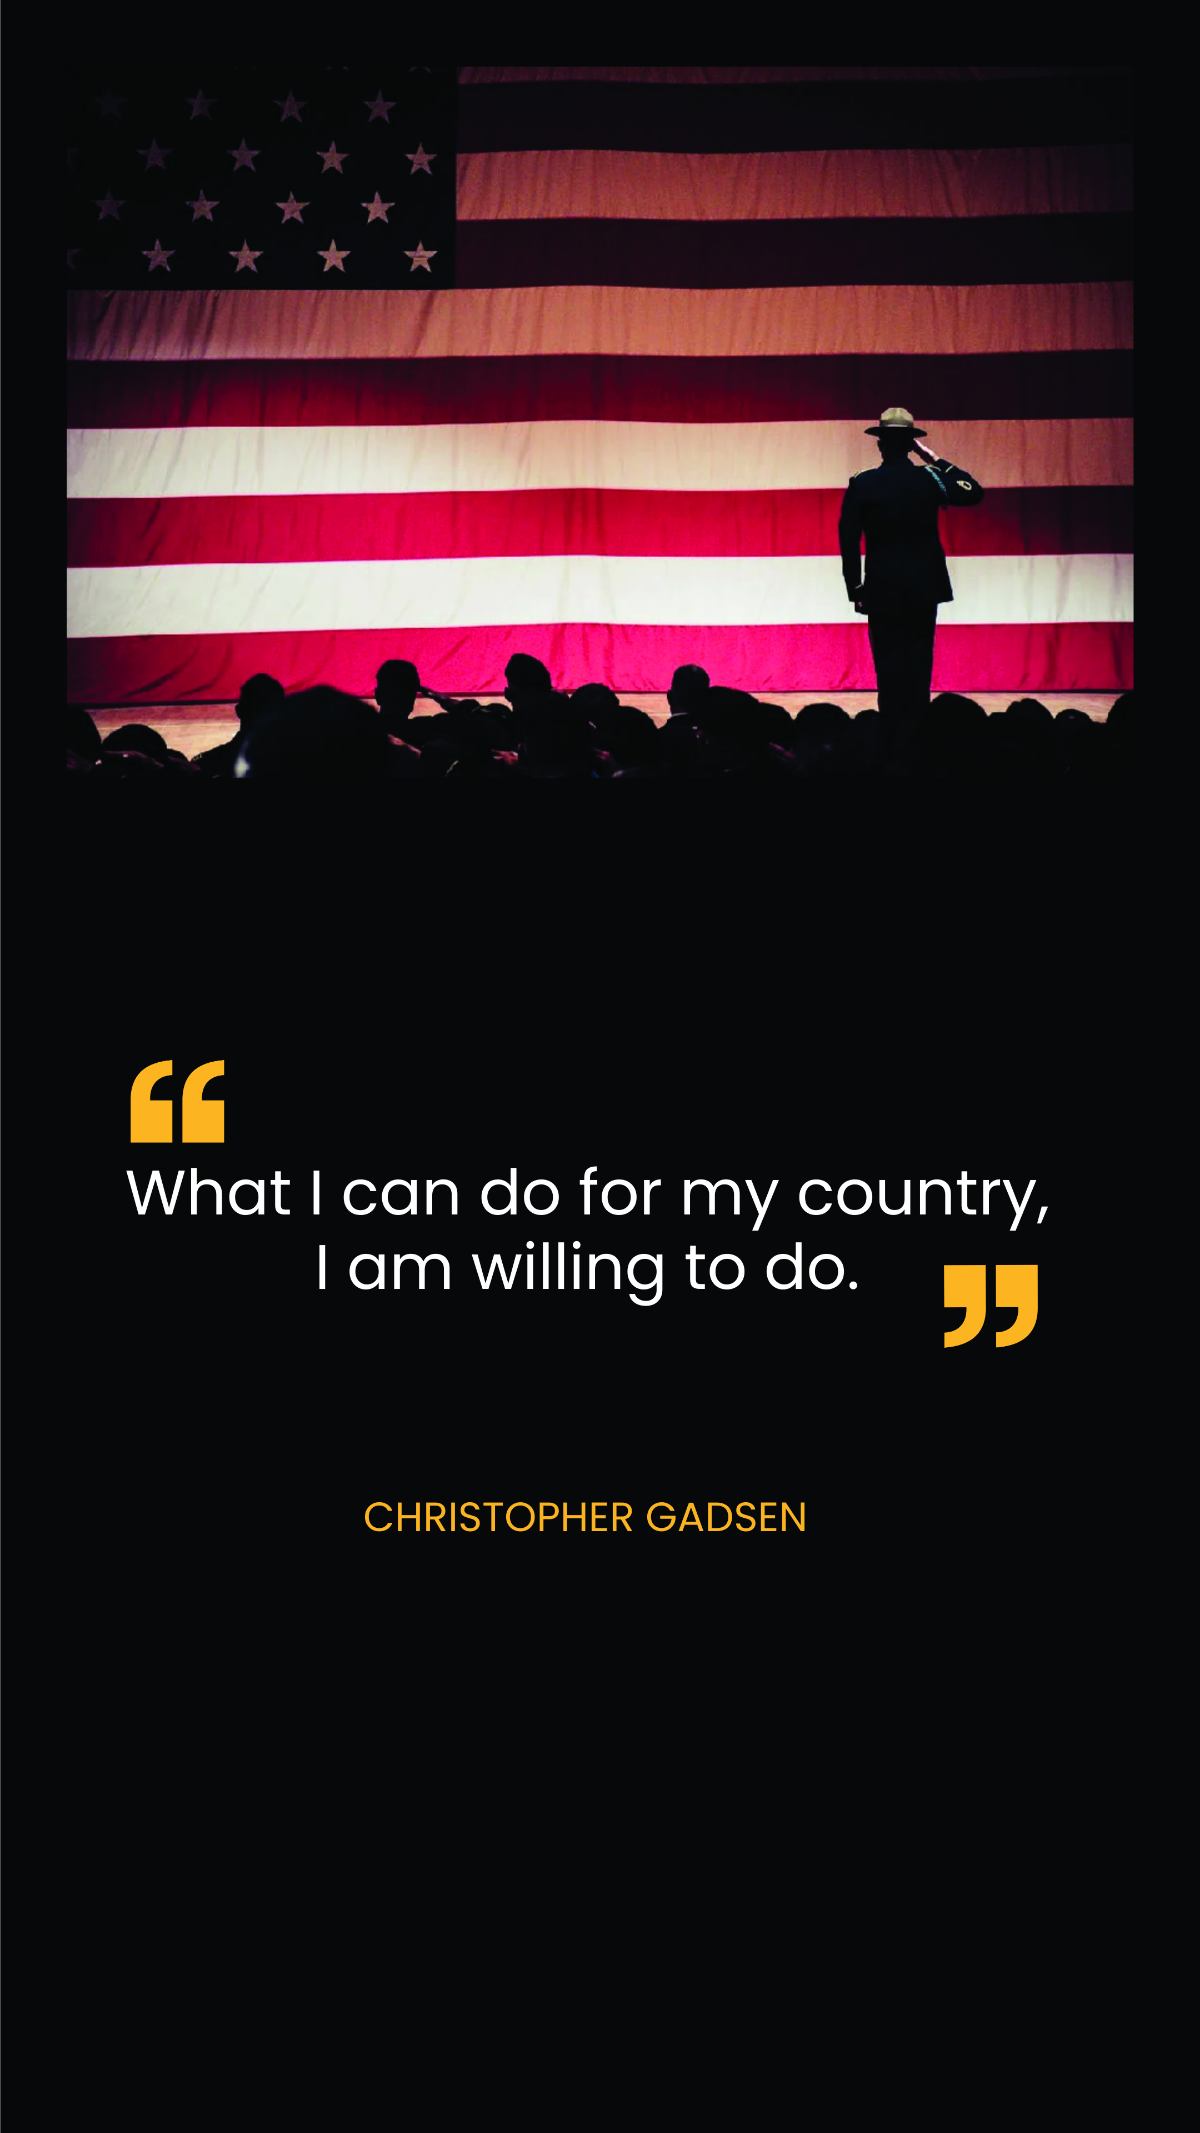 Christopher Gadsden - What I can do for my country, I am willing to do. 